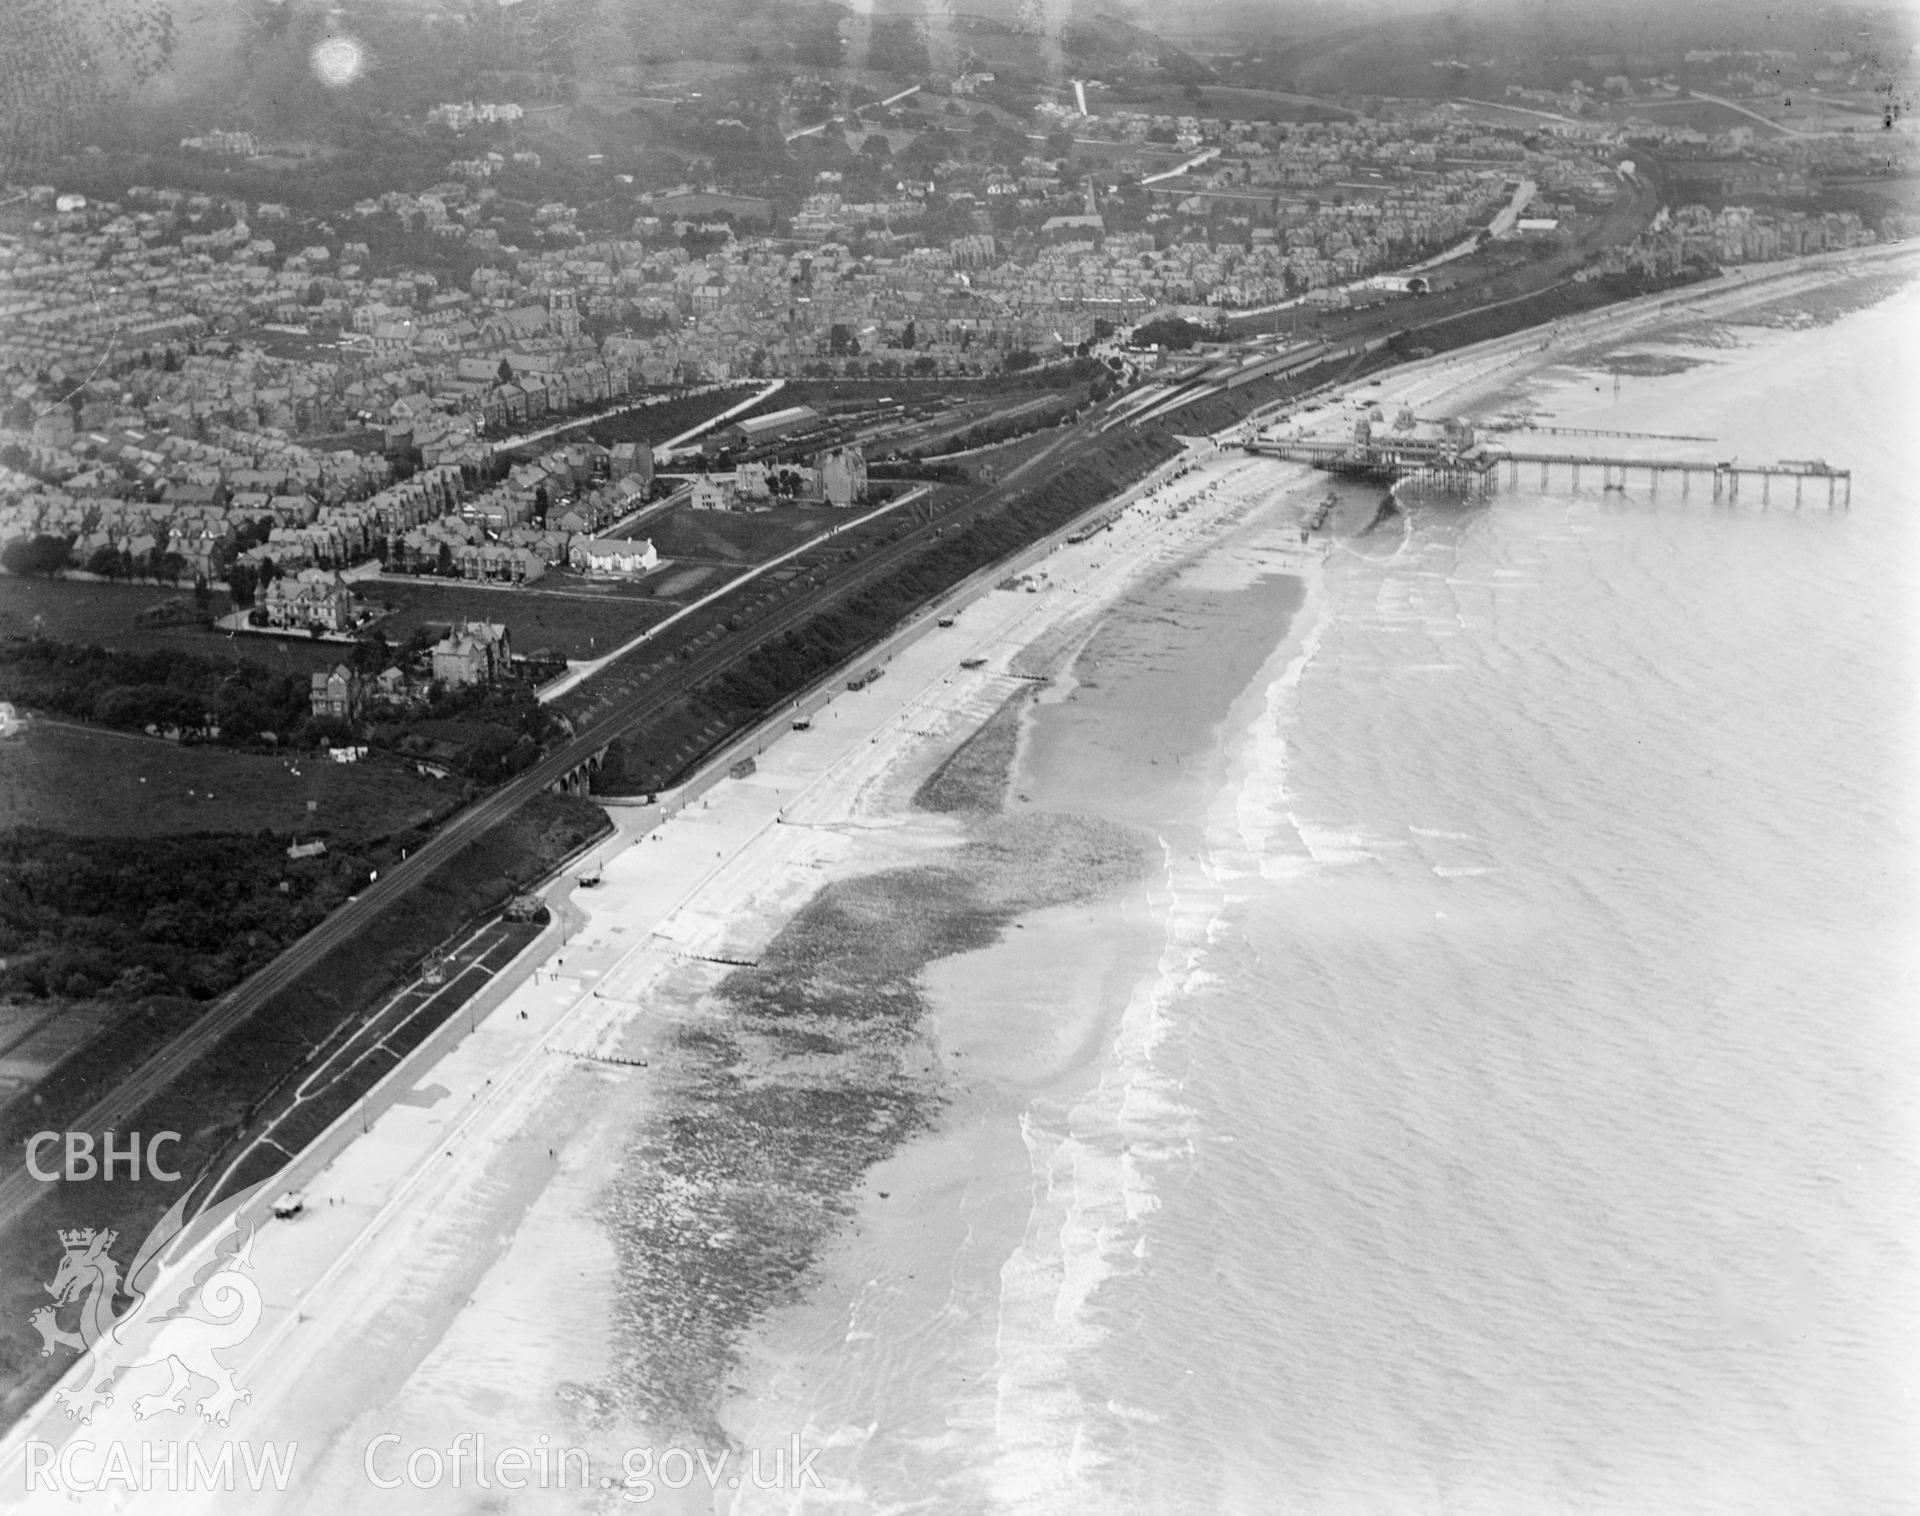 View of Colwyn Bay showing pier, oblique aerial view. 5?x4? black and white glass plate negative.